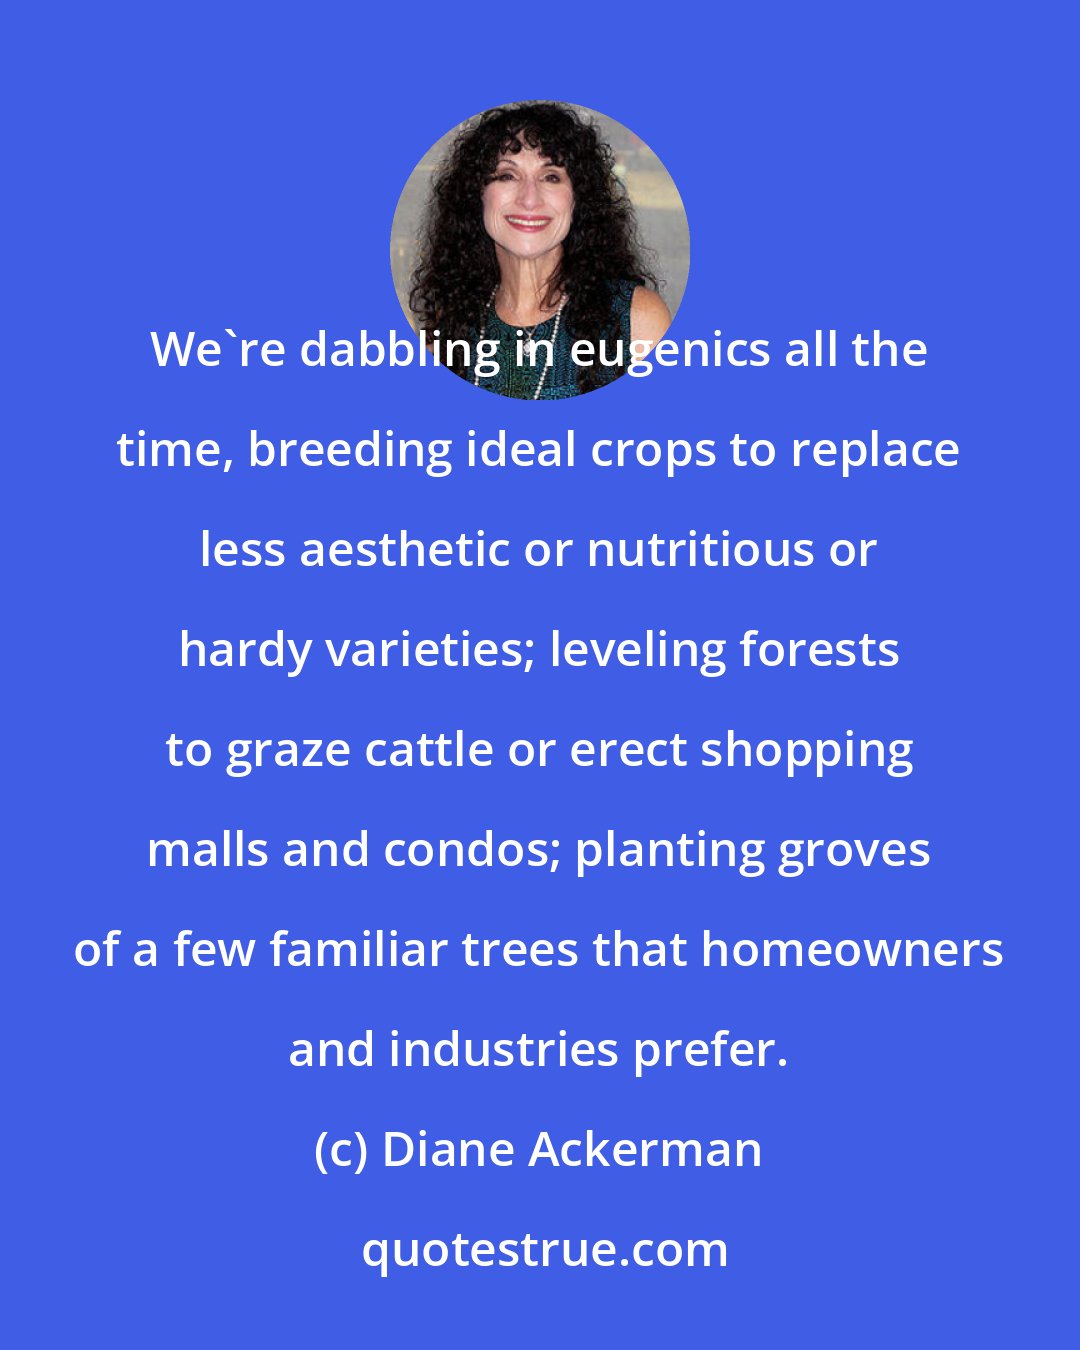 Diane Ackerman: We're dabbling in eugenics all the time, breeding ideal crops to replace less aesthetic or nutritious or hardy varieties; leveling forests to graze cattle or erect shopping malls and condos; planting groves of a few familiar trees that homeowners and industries prefer.